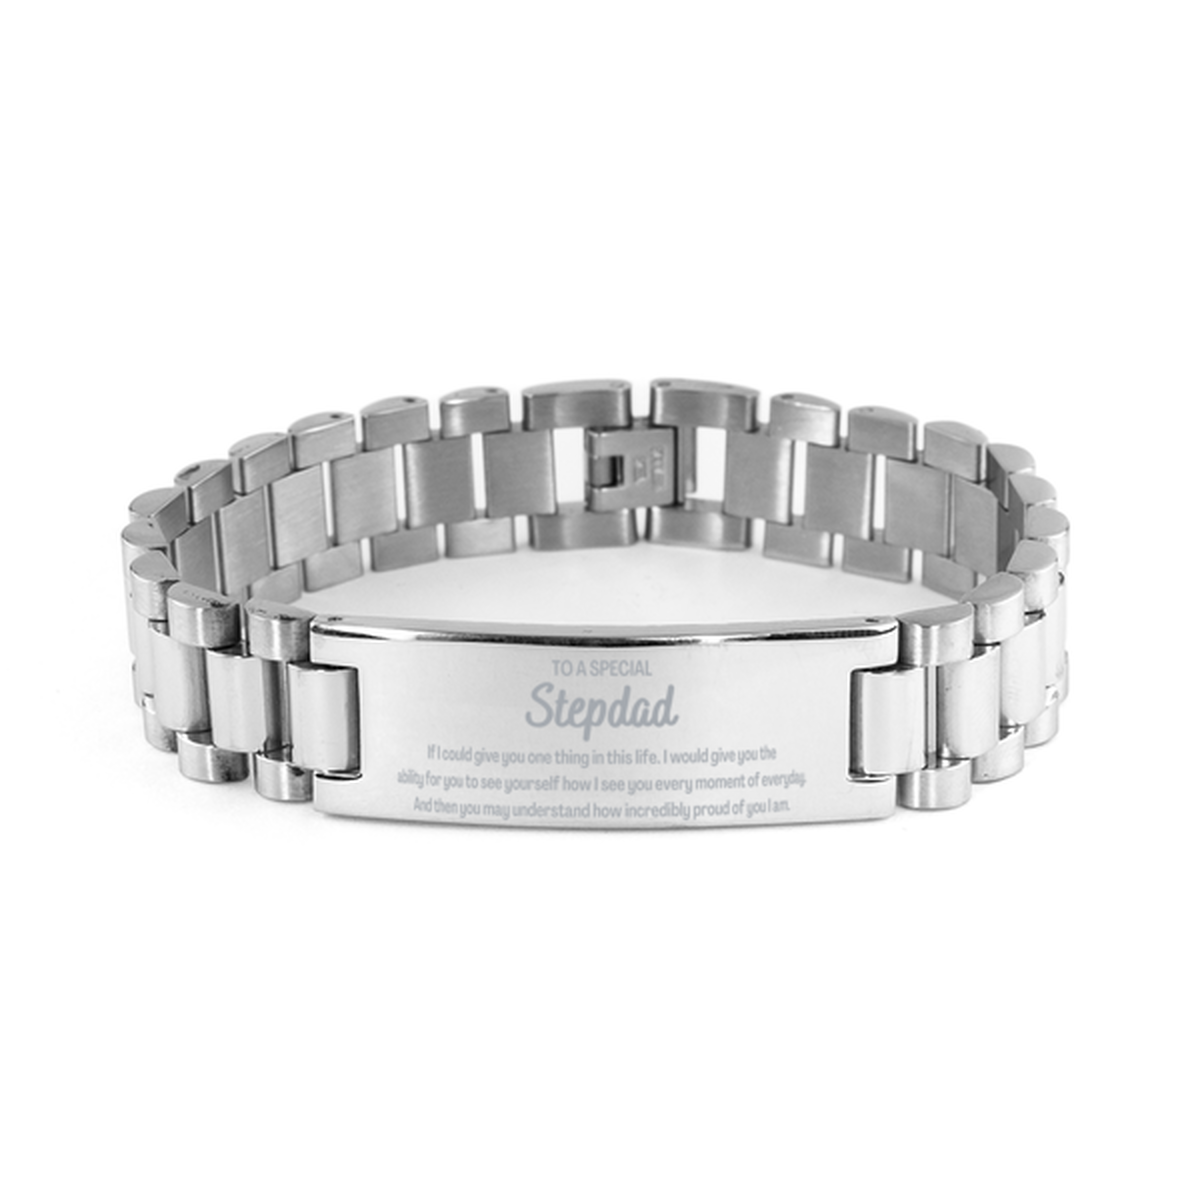 To My Stepdad Ladder Stainless Steel Bracelet, Gifts For Stepdad Engraved, Inspirational Gifts for Christmas Birthday, Epic Gifts for Stepdad To A Special Stepdad how incredibly proud of you I am